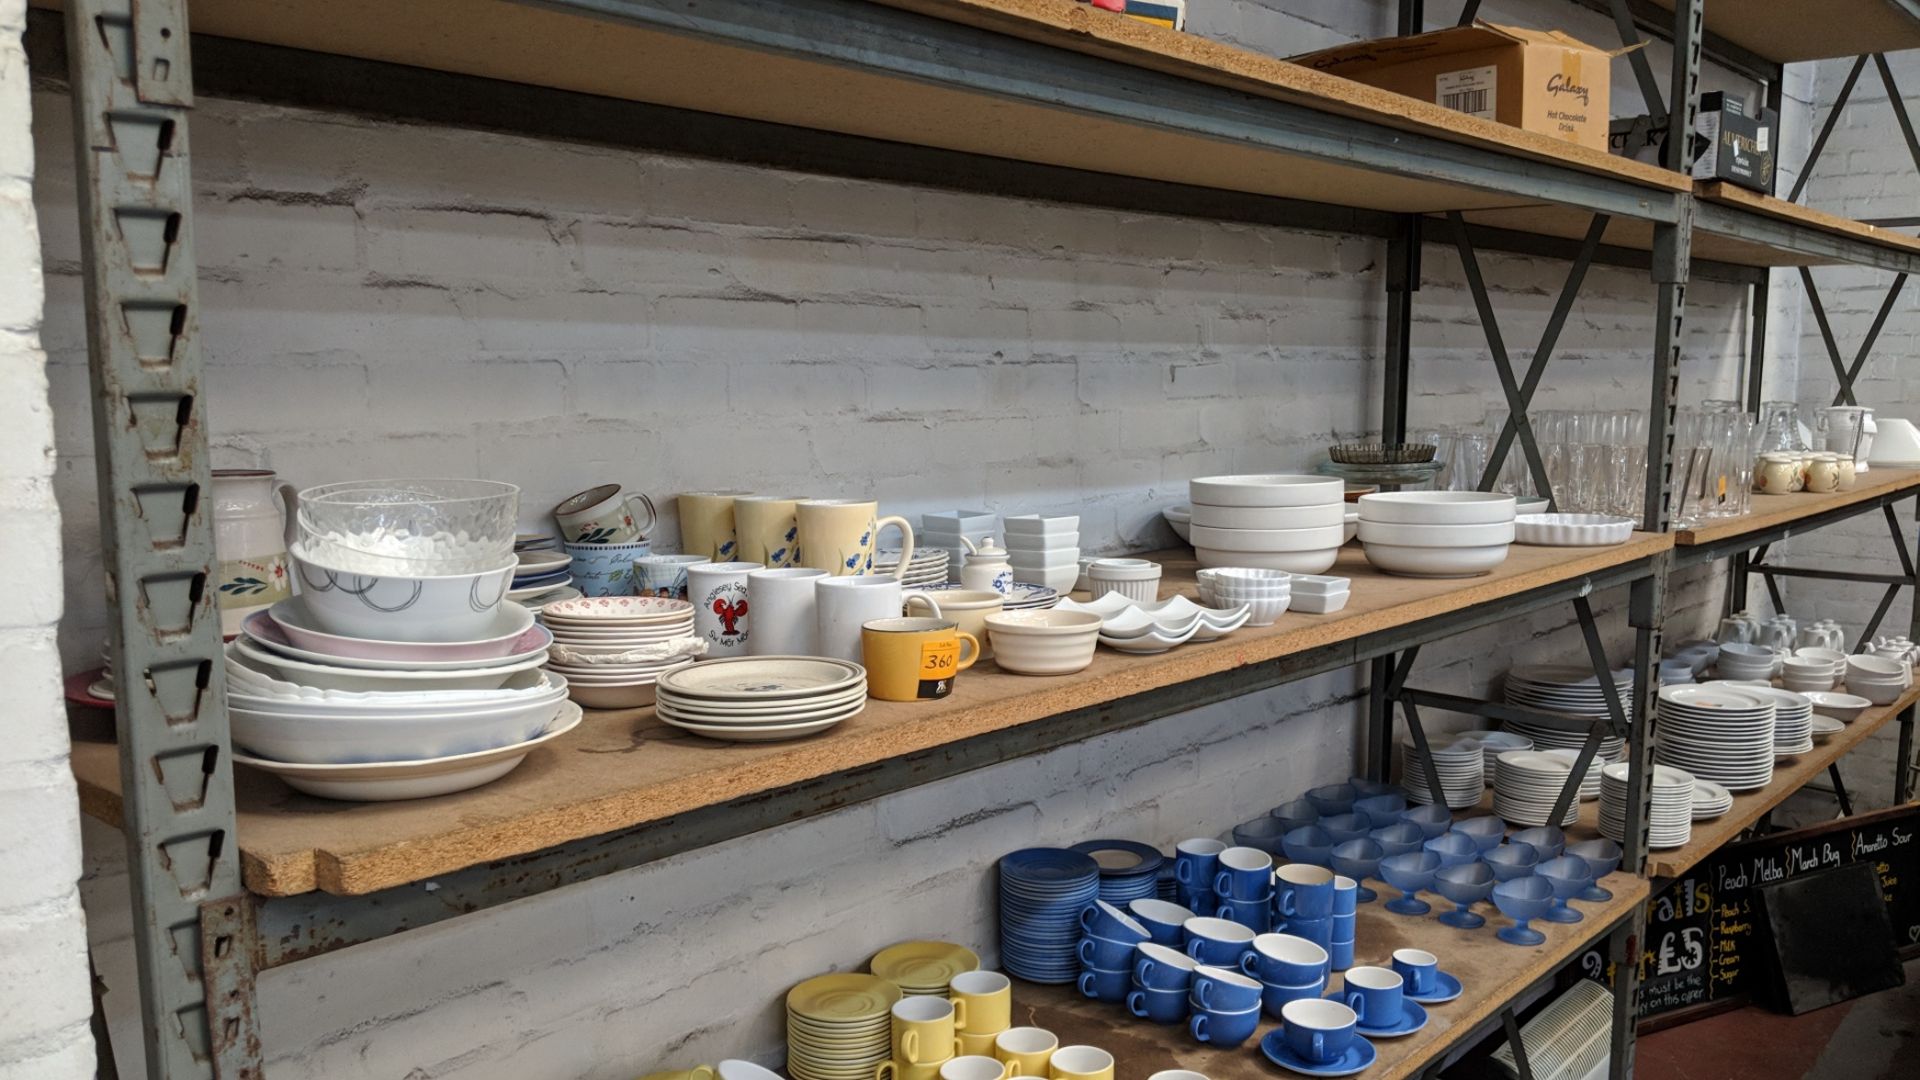 Contents of a bay of assorted crockery IMPORTANT: Please remember goods successfully bid upon must